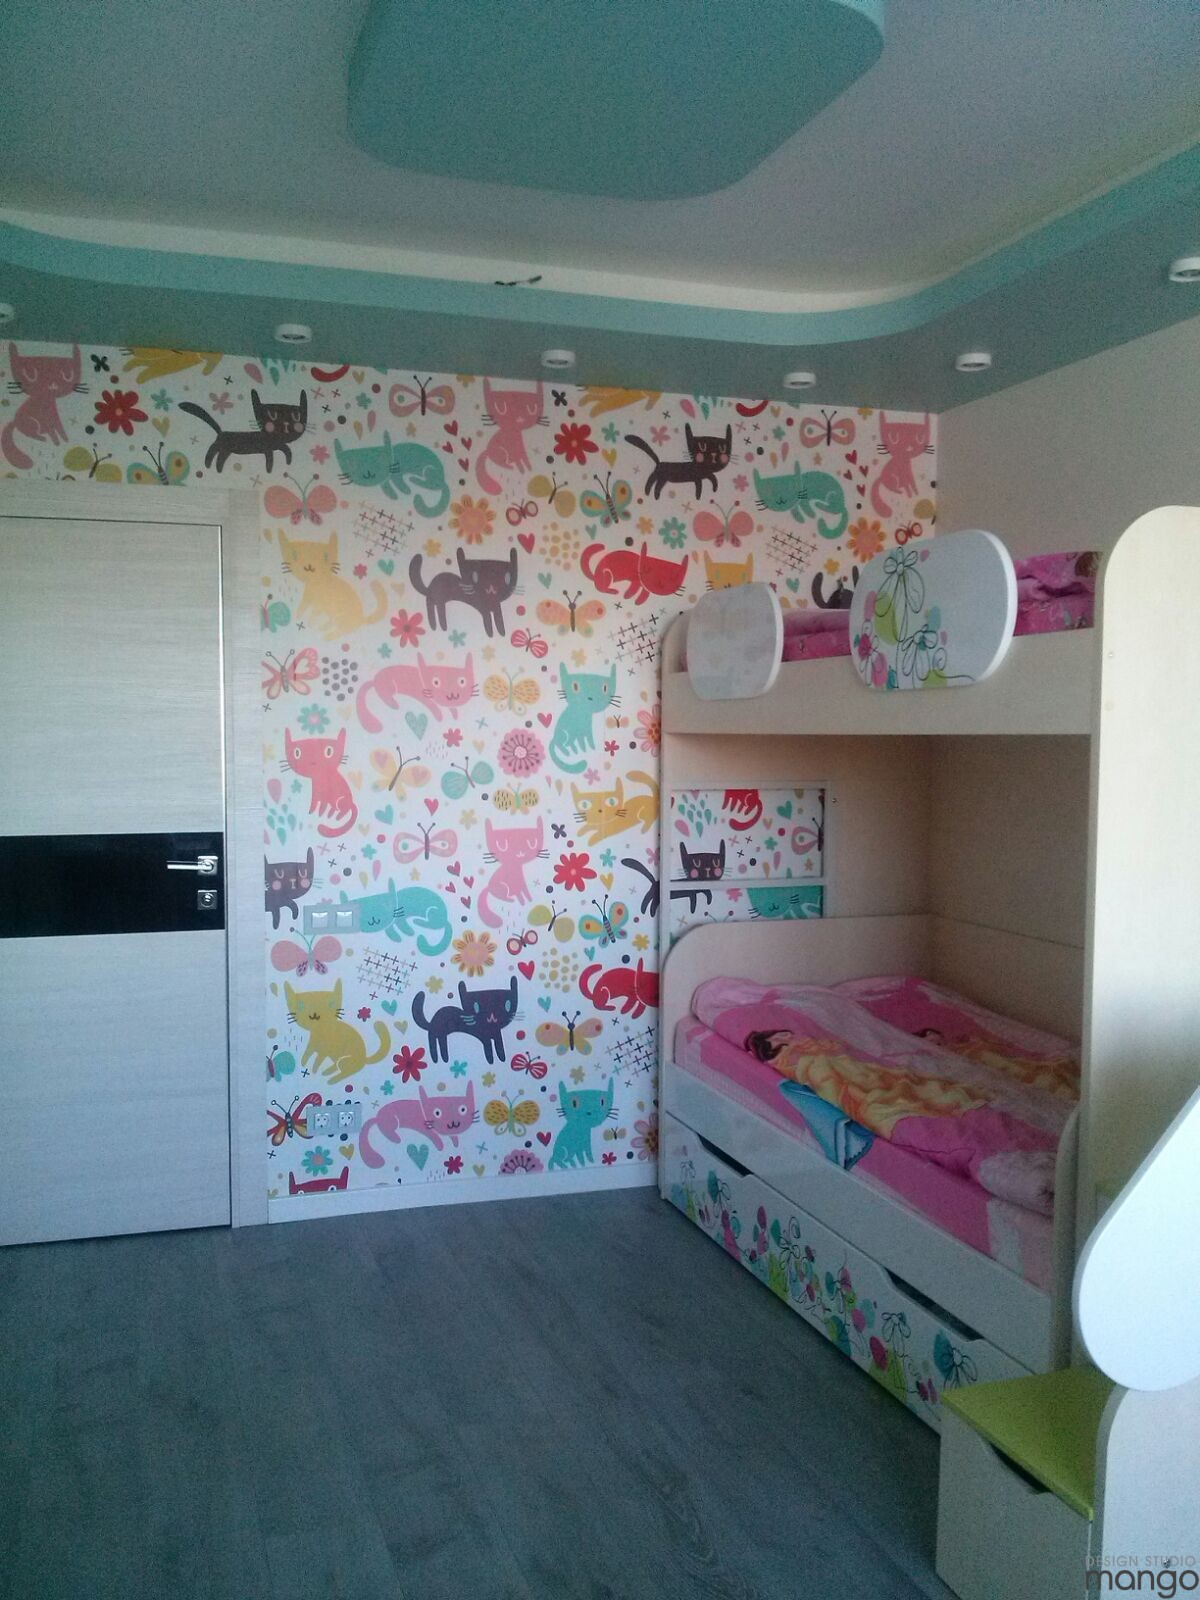 cute pink wallpaper design "width =" 1200 "height =" 1600 "srcset =" https://mileray.com/wp-content/uploads/2020/05/1588508579_483_Attractive-Girls-Room-Decor-Which-Applying-Pink-Color-Accent-Design.jpg 1200w, https: / / mileray.com/wp-content/uploads/2016/11/Design-Studio-Mango3-10-225x300.jpg 225w, https://mileray.com/wp-content/uploads/2016/11/Design-Studio- Mango3 -10-768x1024.jpg 768w, https://mileray.com/wp-content/uploads/2016/11/Design-Studio-Mango3-10-696x928.jpg 696w, https://mileray.com/wp- content / uploads / 2016/11 / Design-Studio-Mango3-10-1068x1424.jpg 1068w, https://mileray.com/wp-content/uploads/2016/11/Design-Studio-Mango3-10-315x420.jpg 315w "Sizes =" (maximum width: 1200px) 100vw, 1200px